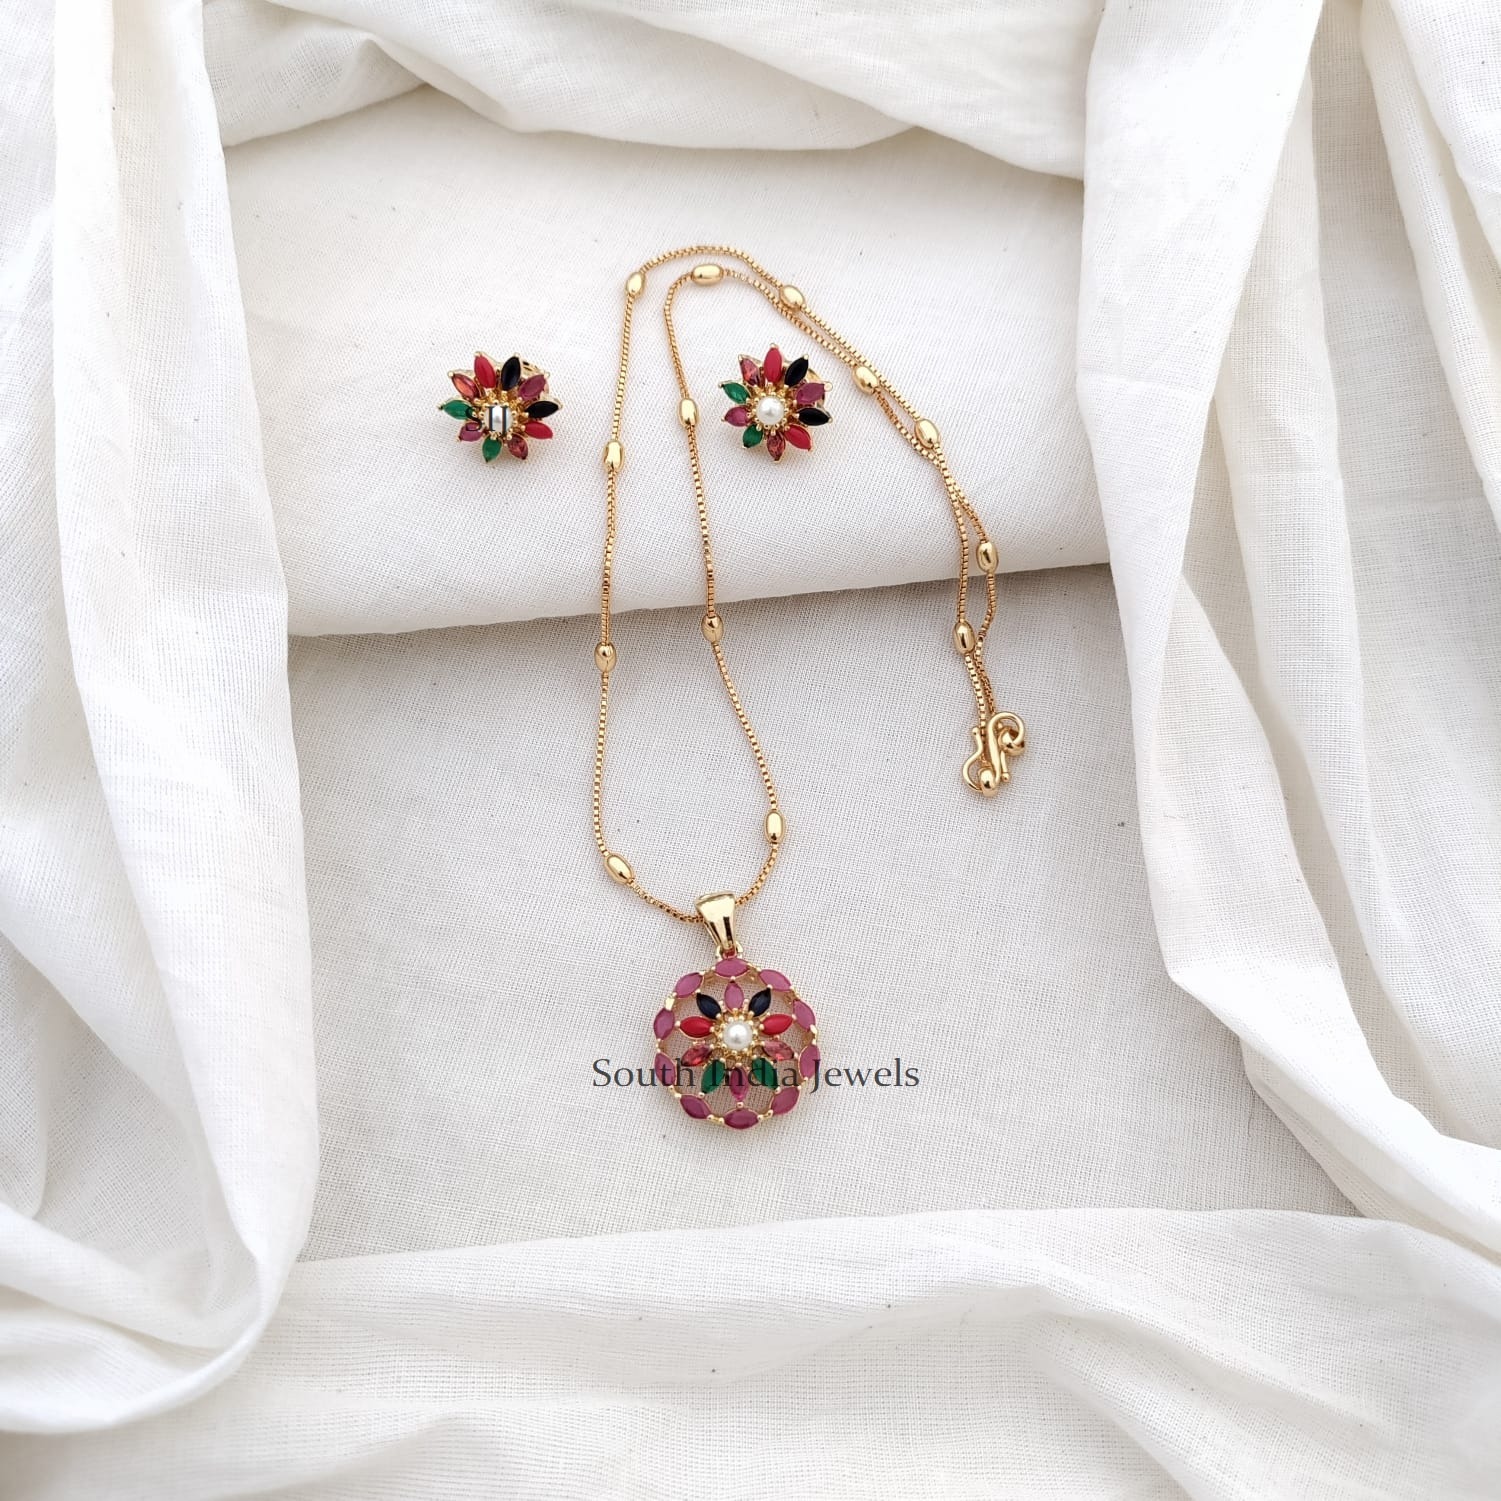 Stunning Floral Design Pendant Set With Chain